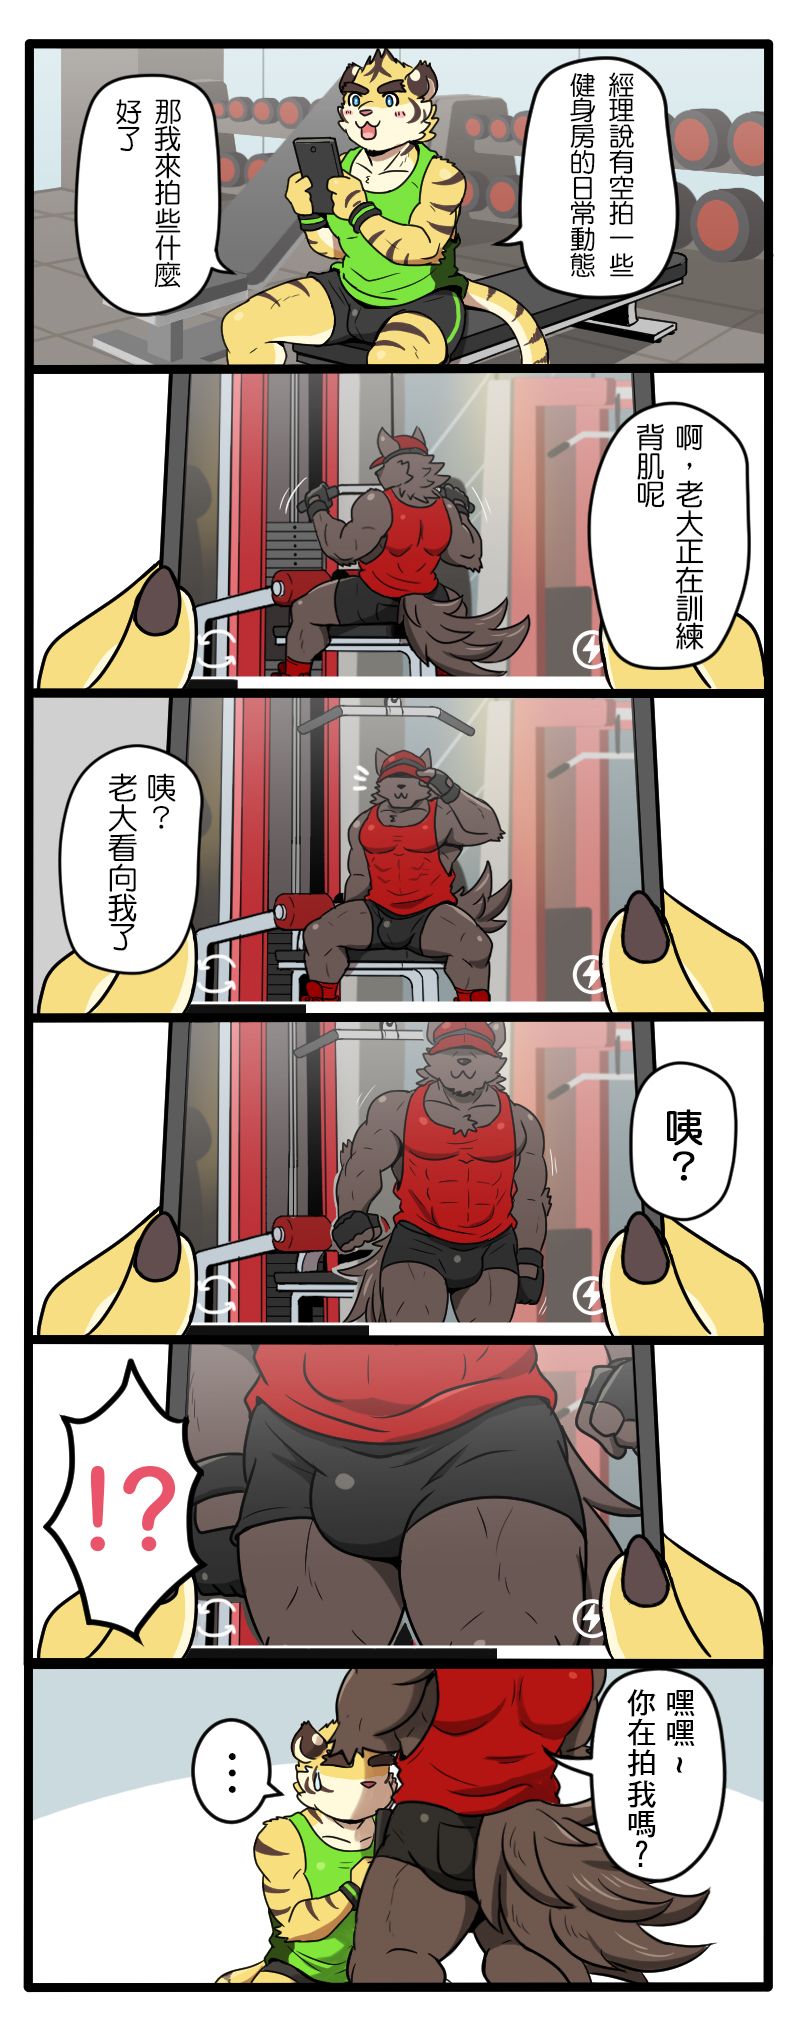 [Ripple Moon (漣漪月影)] Gym Pals - Pal and his gym pals' gaily daily life [Chinese] (ongoing) - Page 6